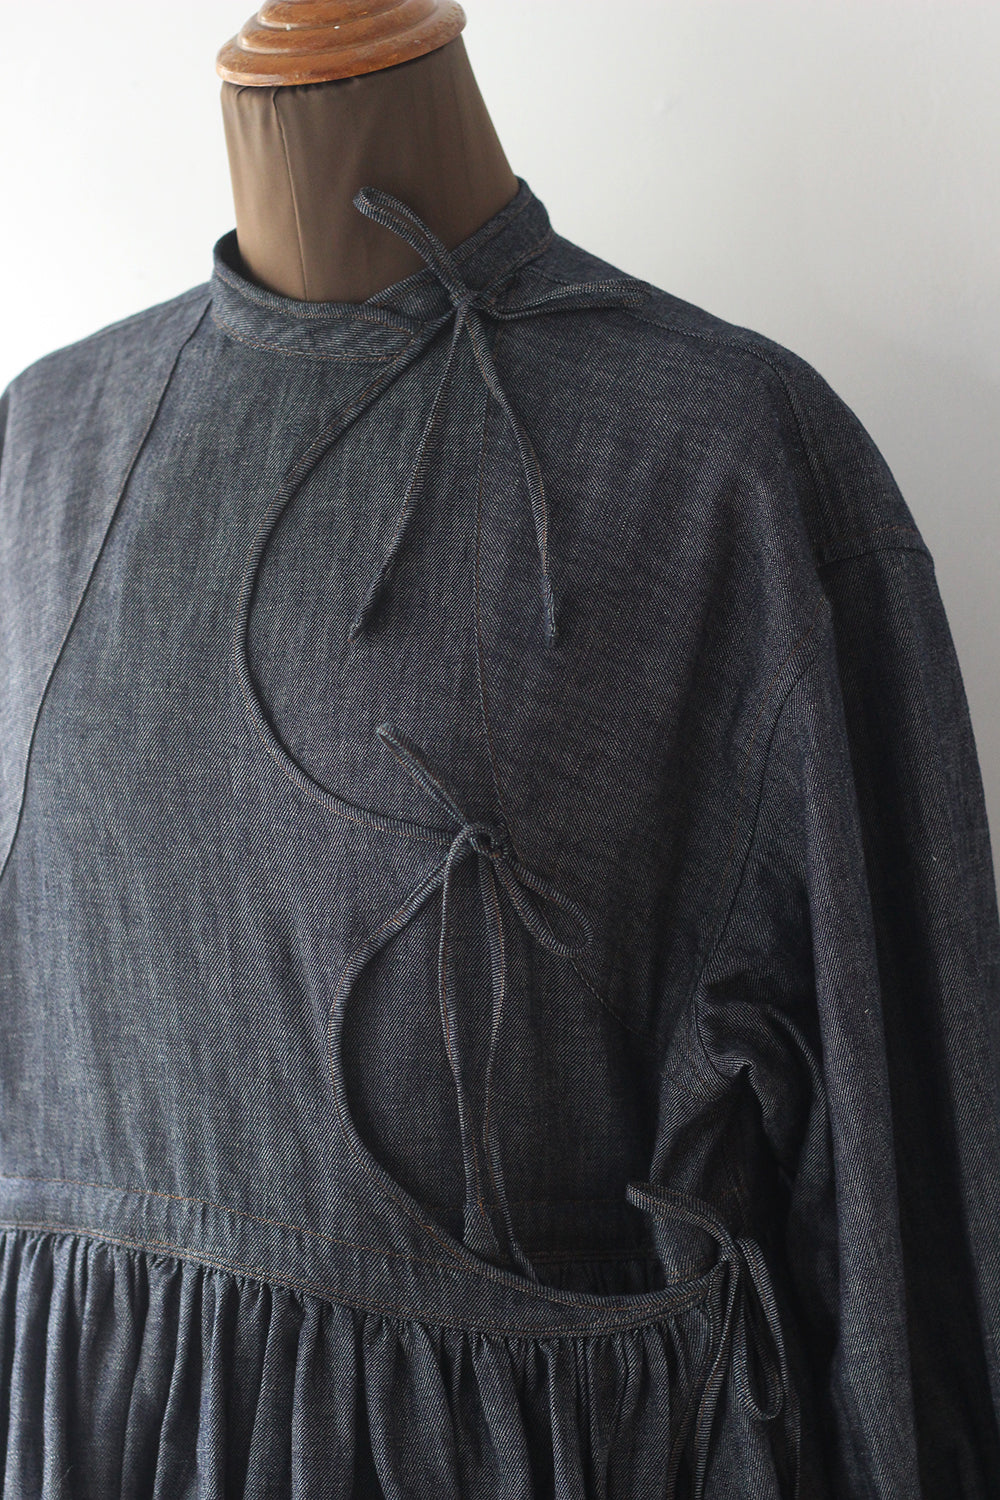 WRYHT "KNOTTED ASYMMETRY FRONT TOP" (indigo)